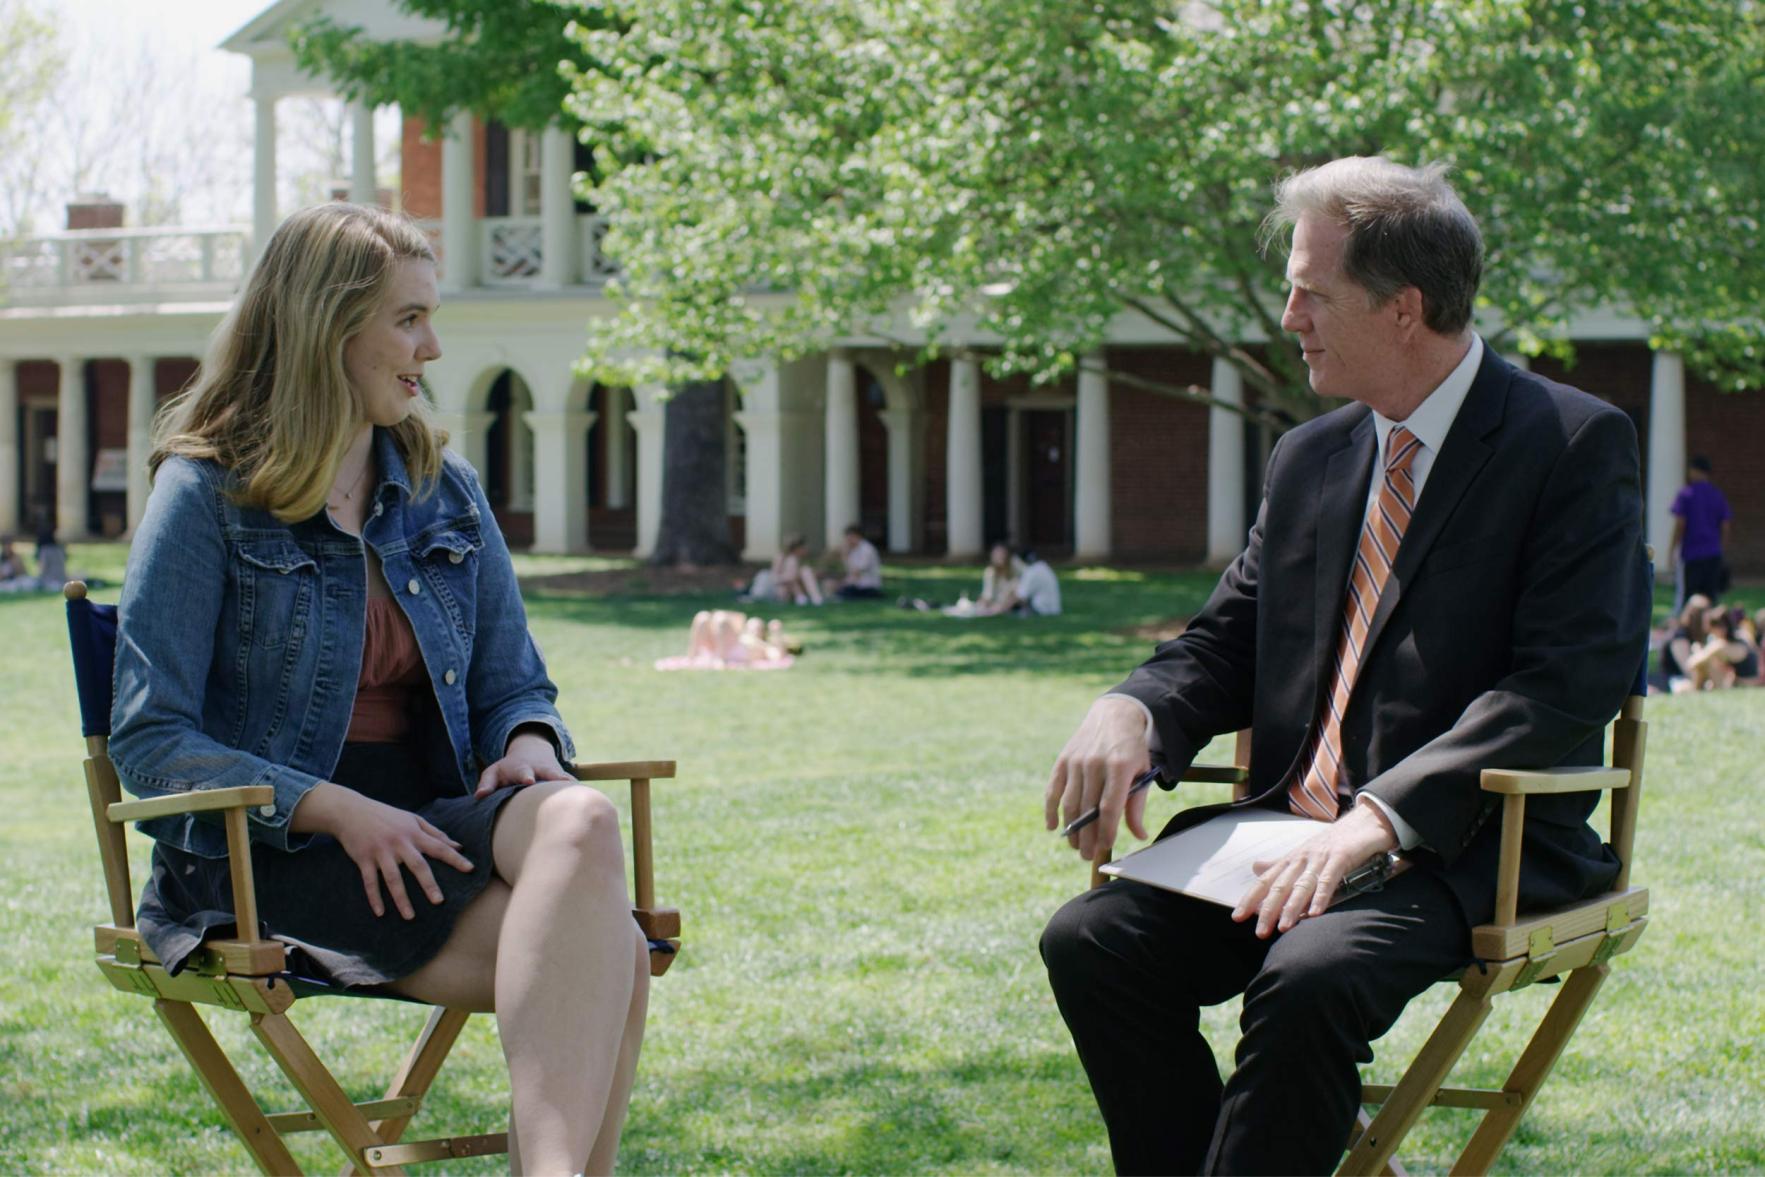 Erica Szymanski and Mike Mather talking together in directors' chairs on the Lawn